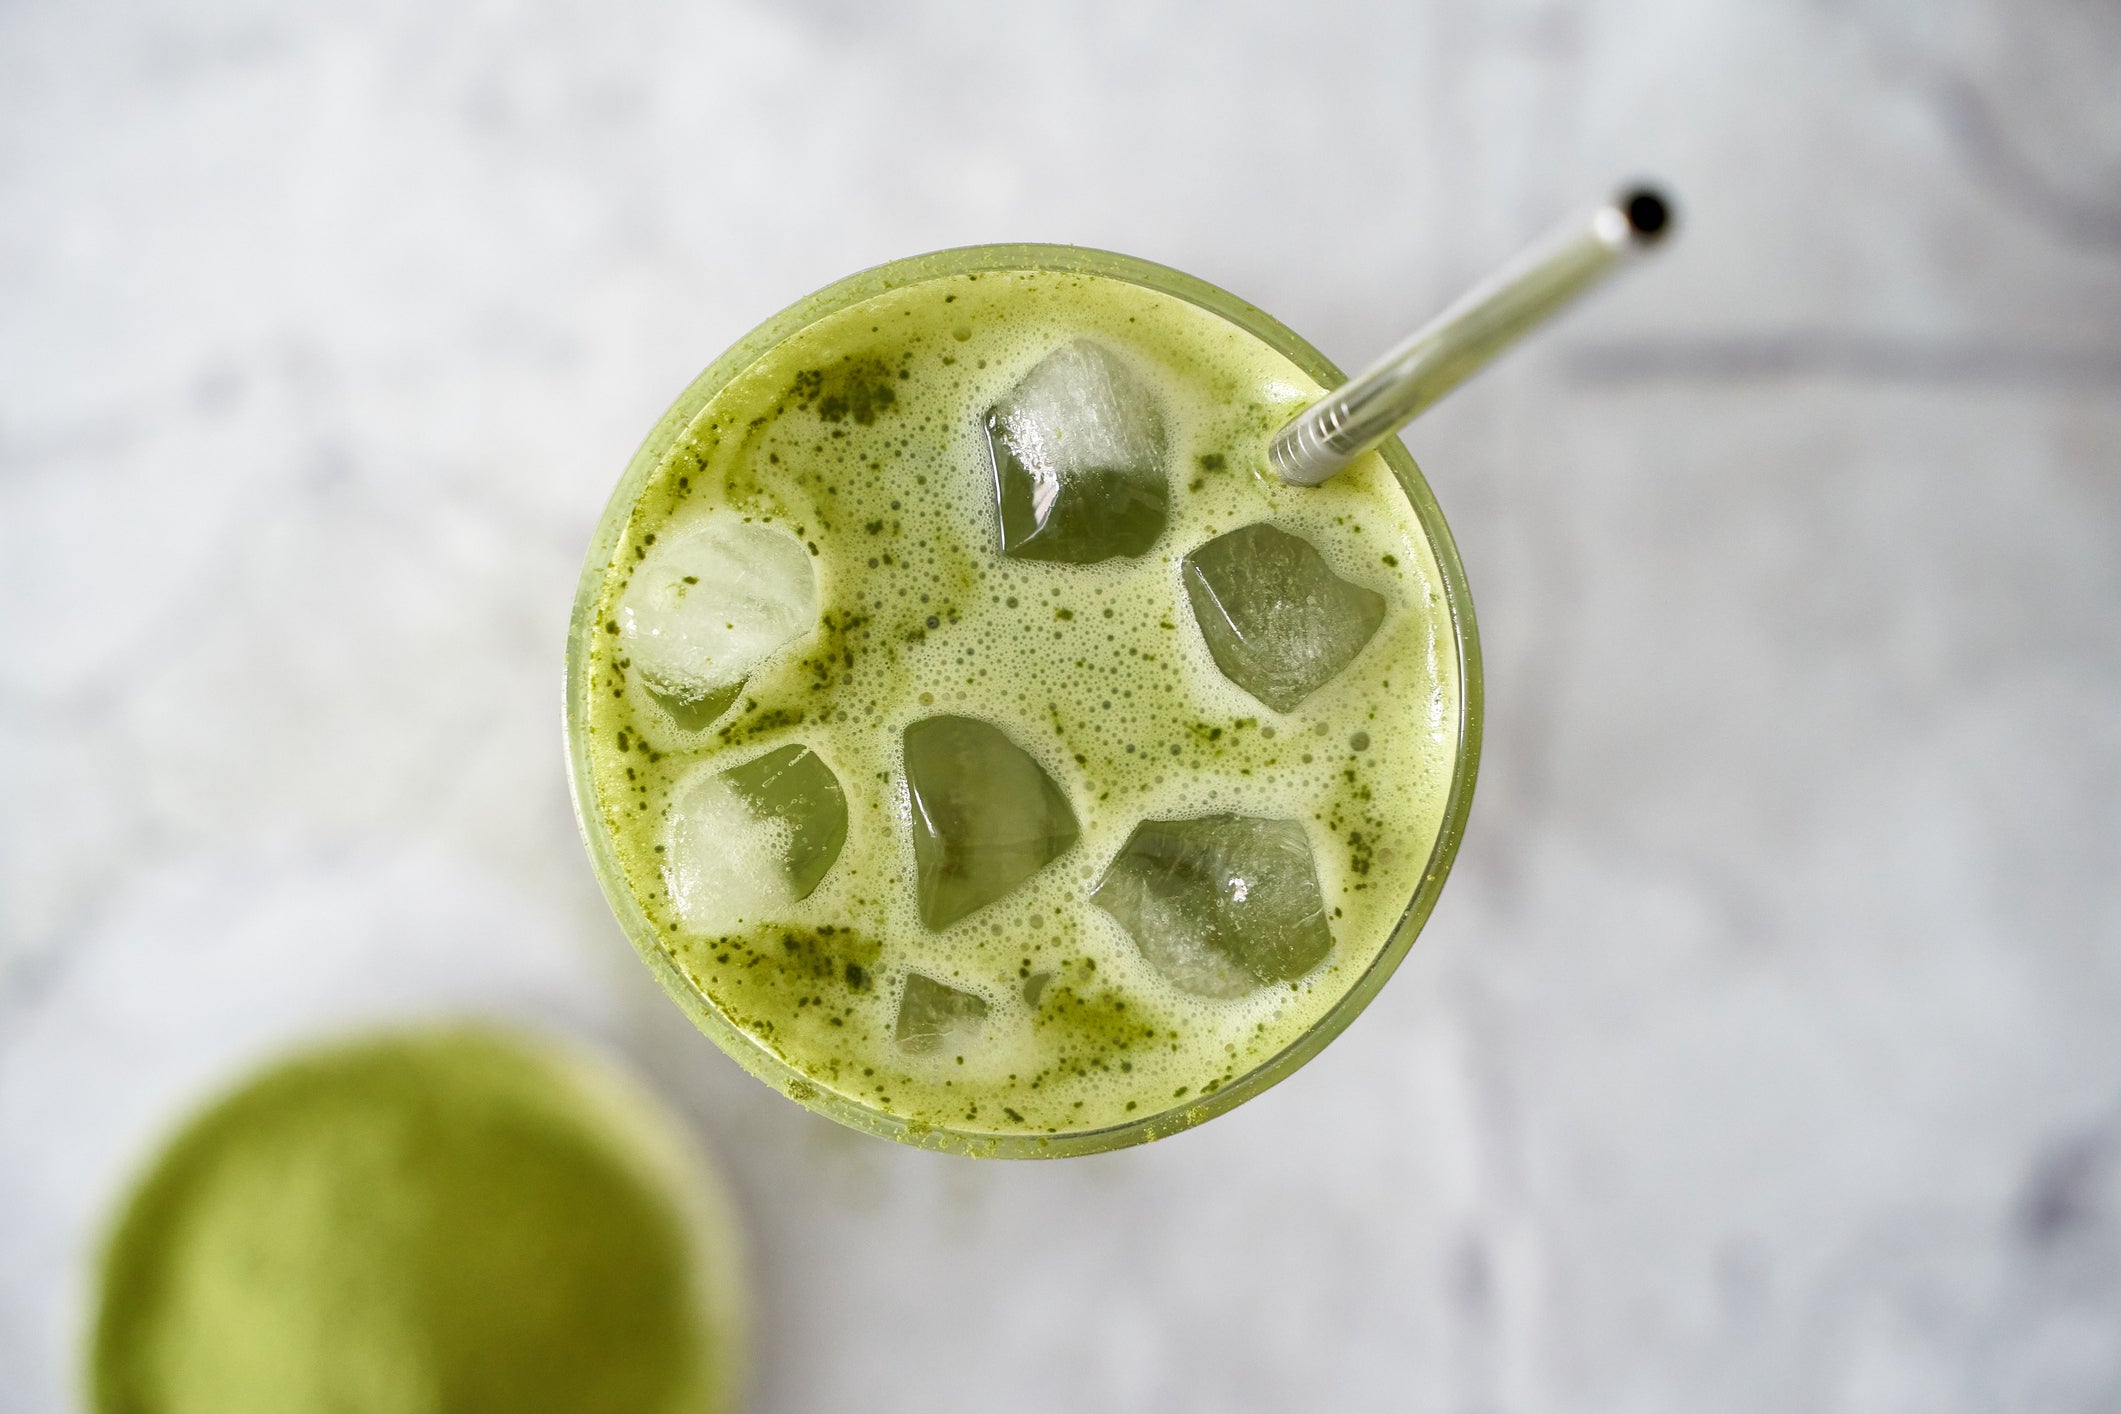 Lucabe Coffee Co. - Our Matcha Blender is more than meets the eye